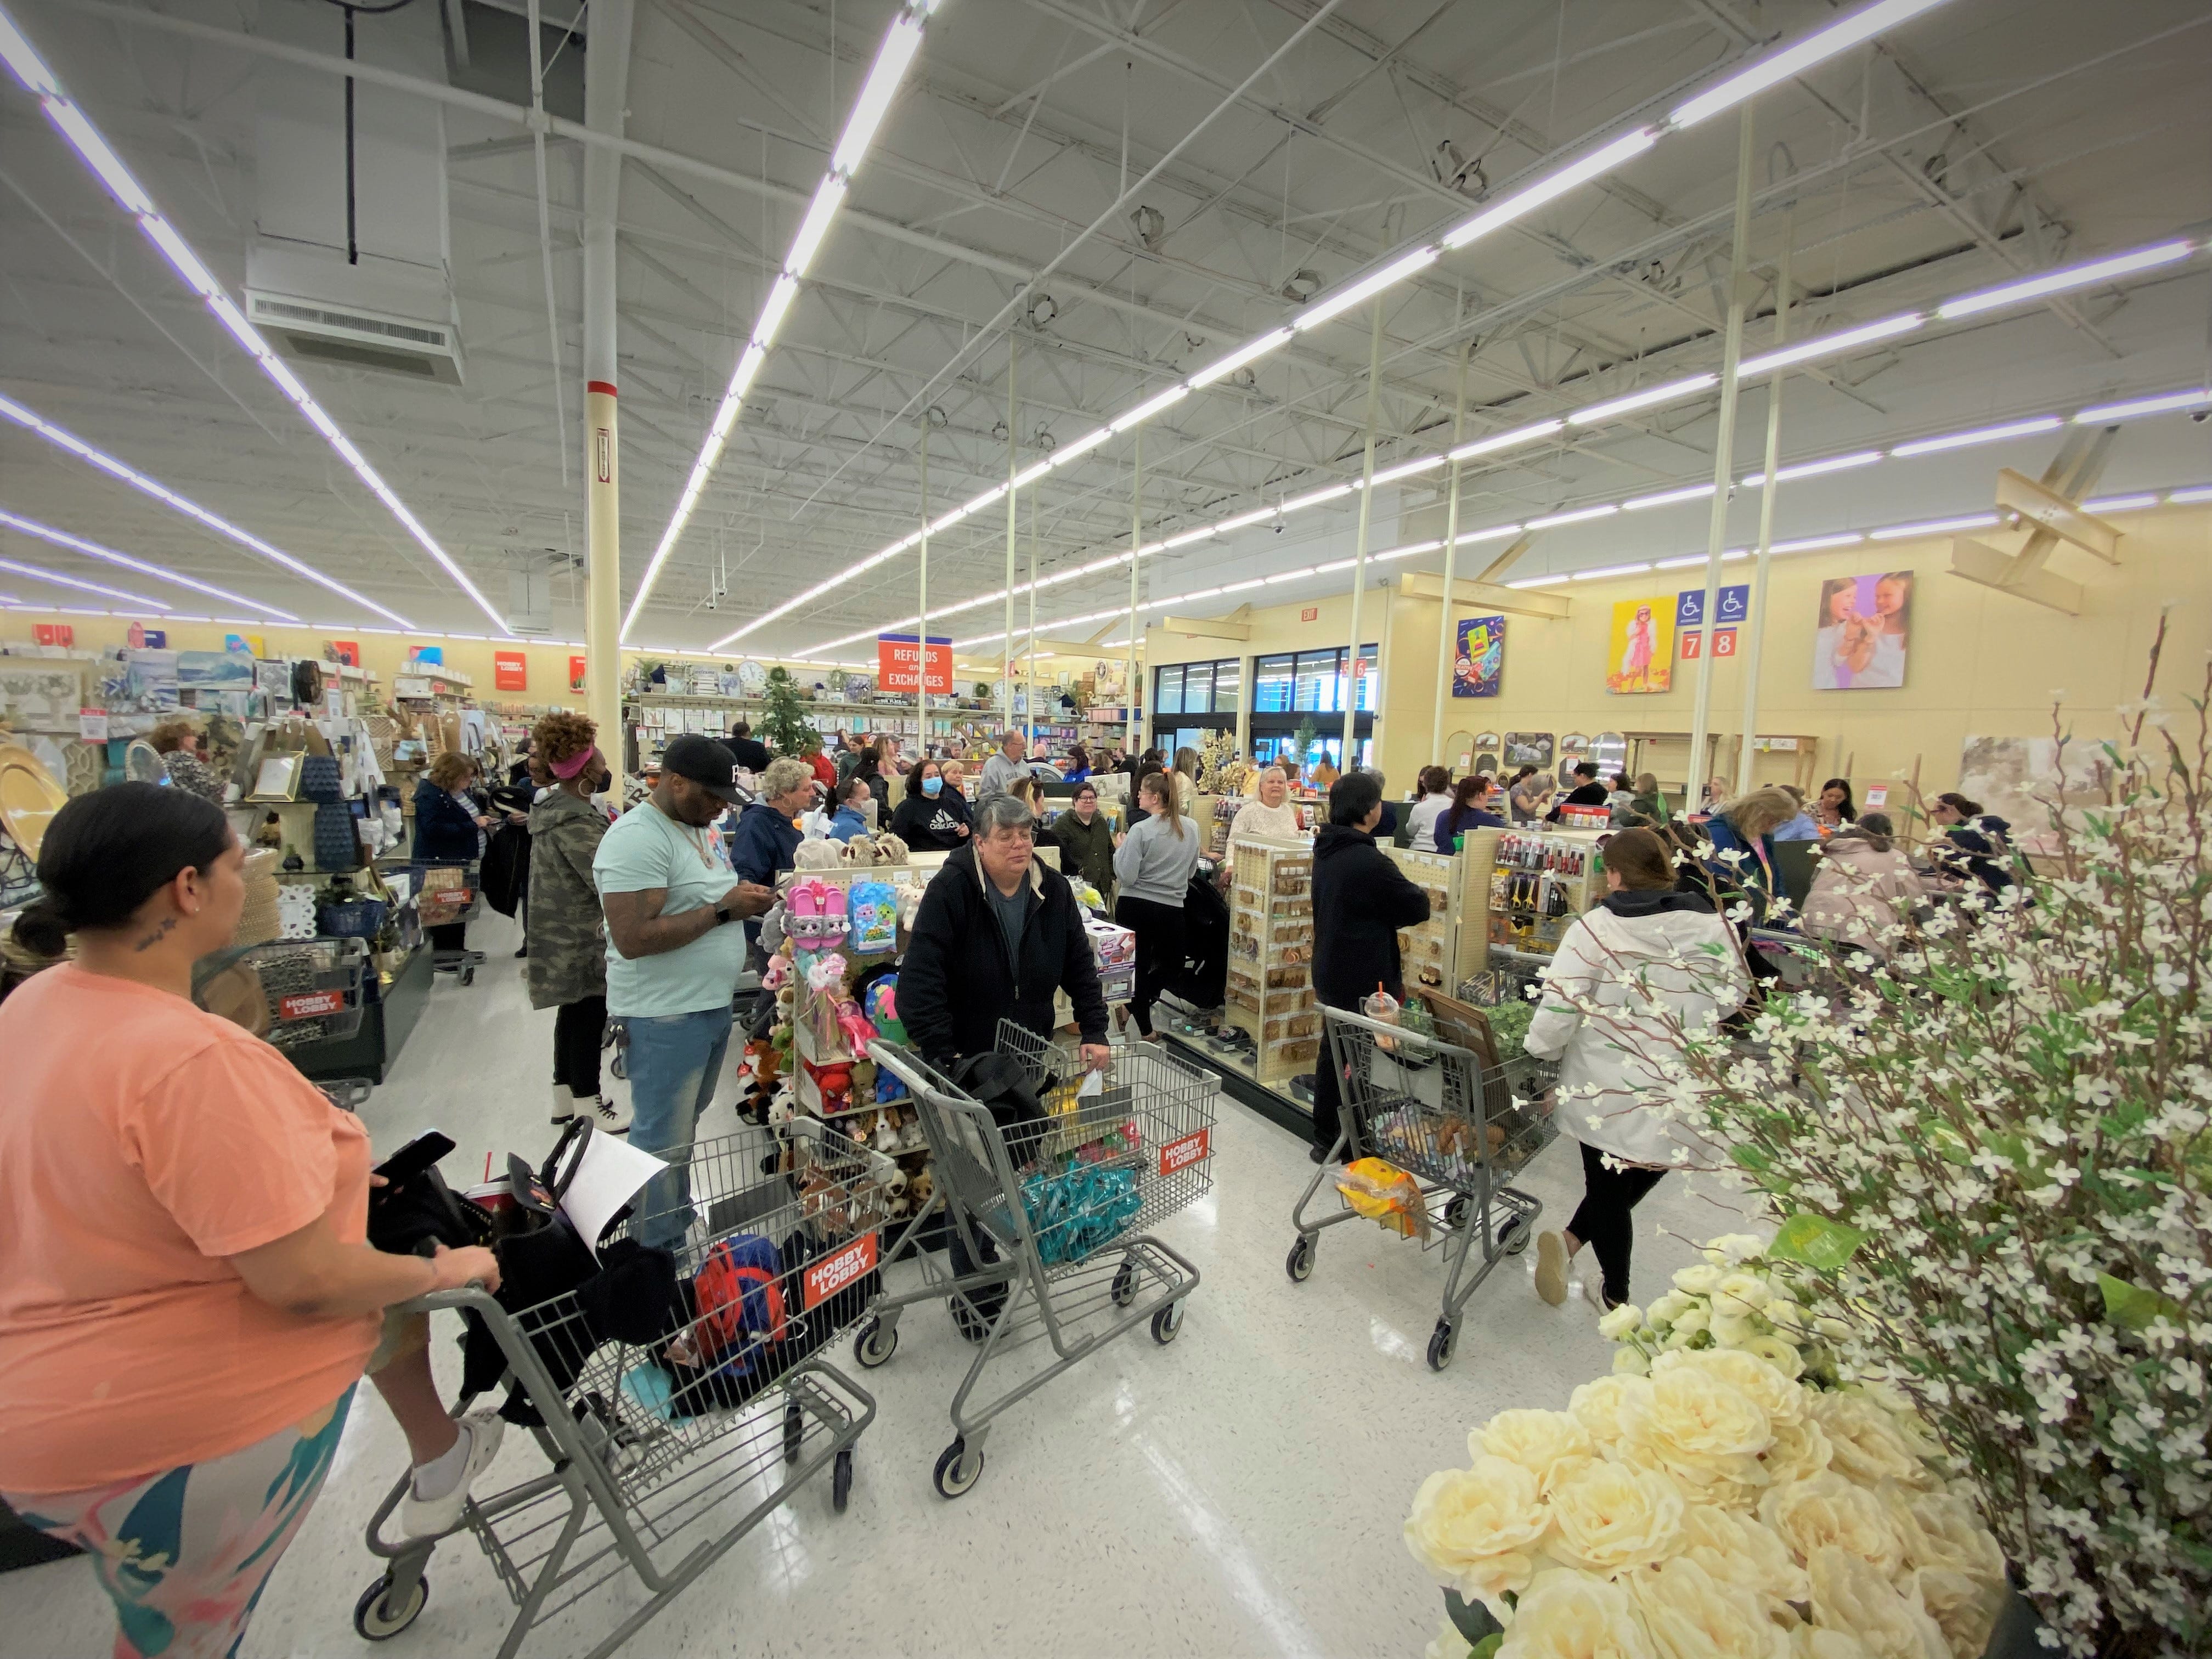 Hobby Lobby is open in Christiana. Delaware now has two.